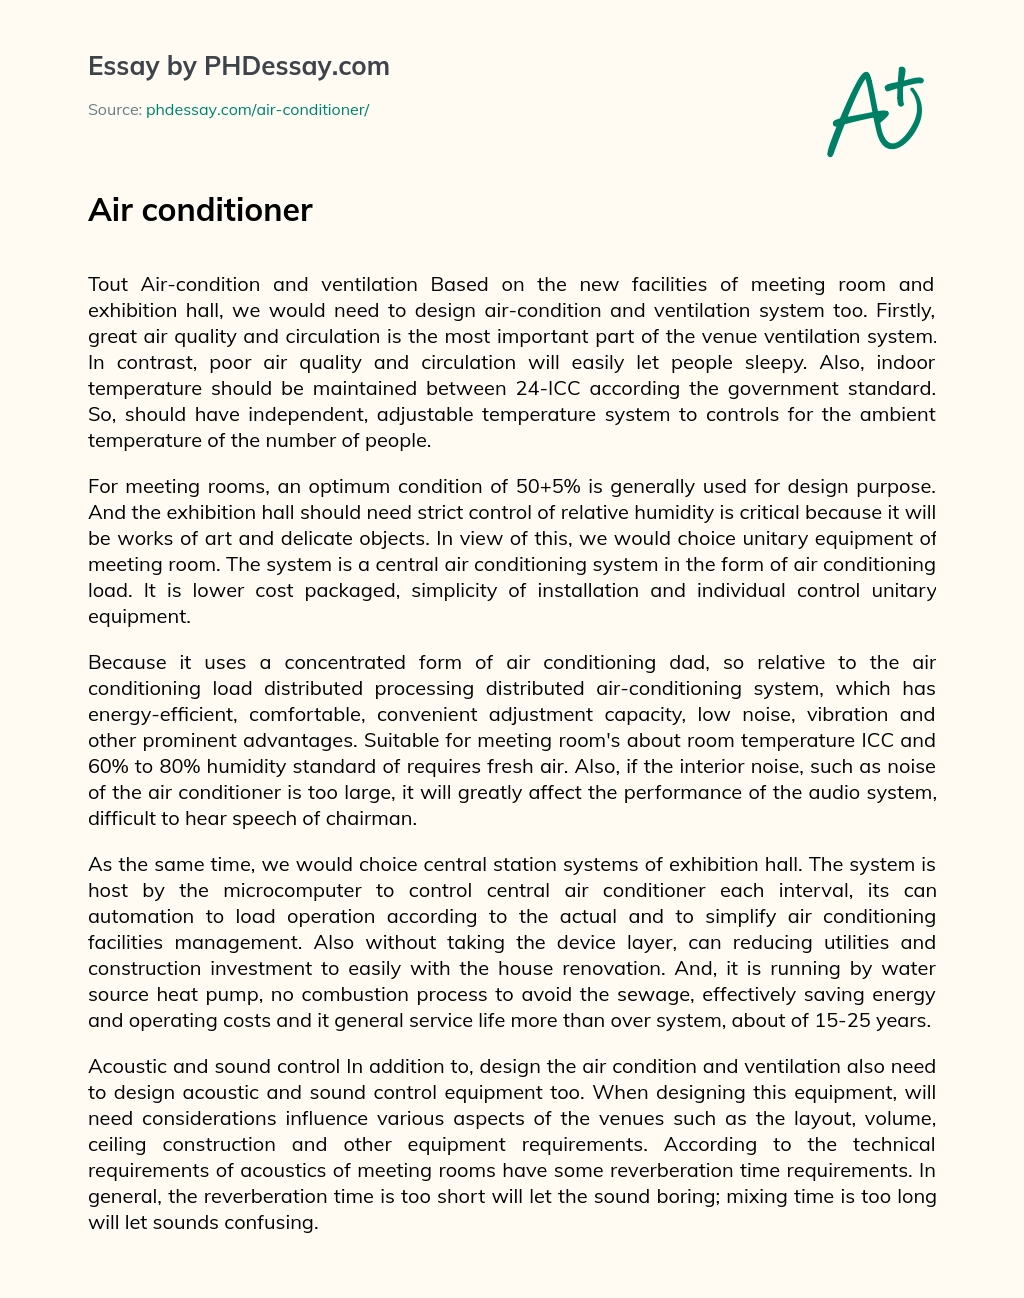 essay about air conditioner